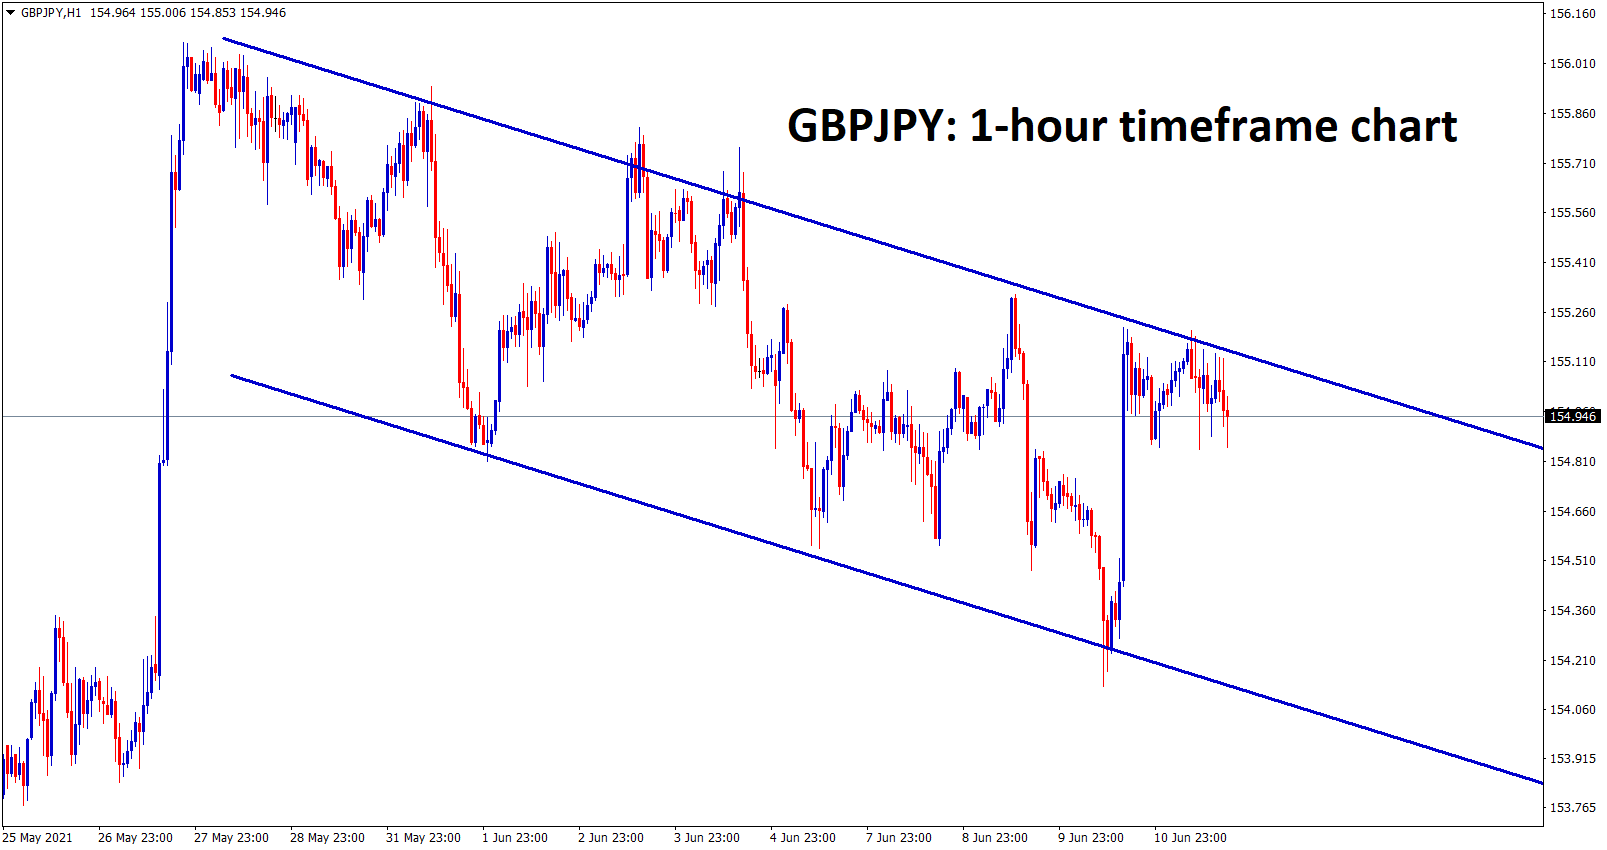 GBPJPY is moving in a descending channel and its consolidating now at the lower high zone